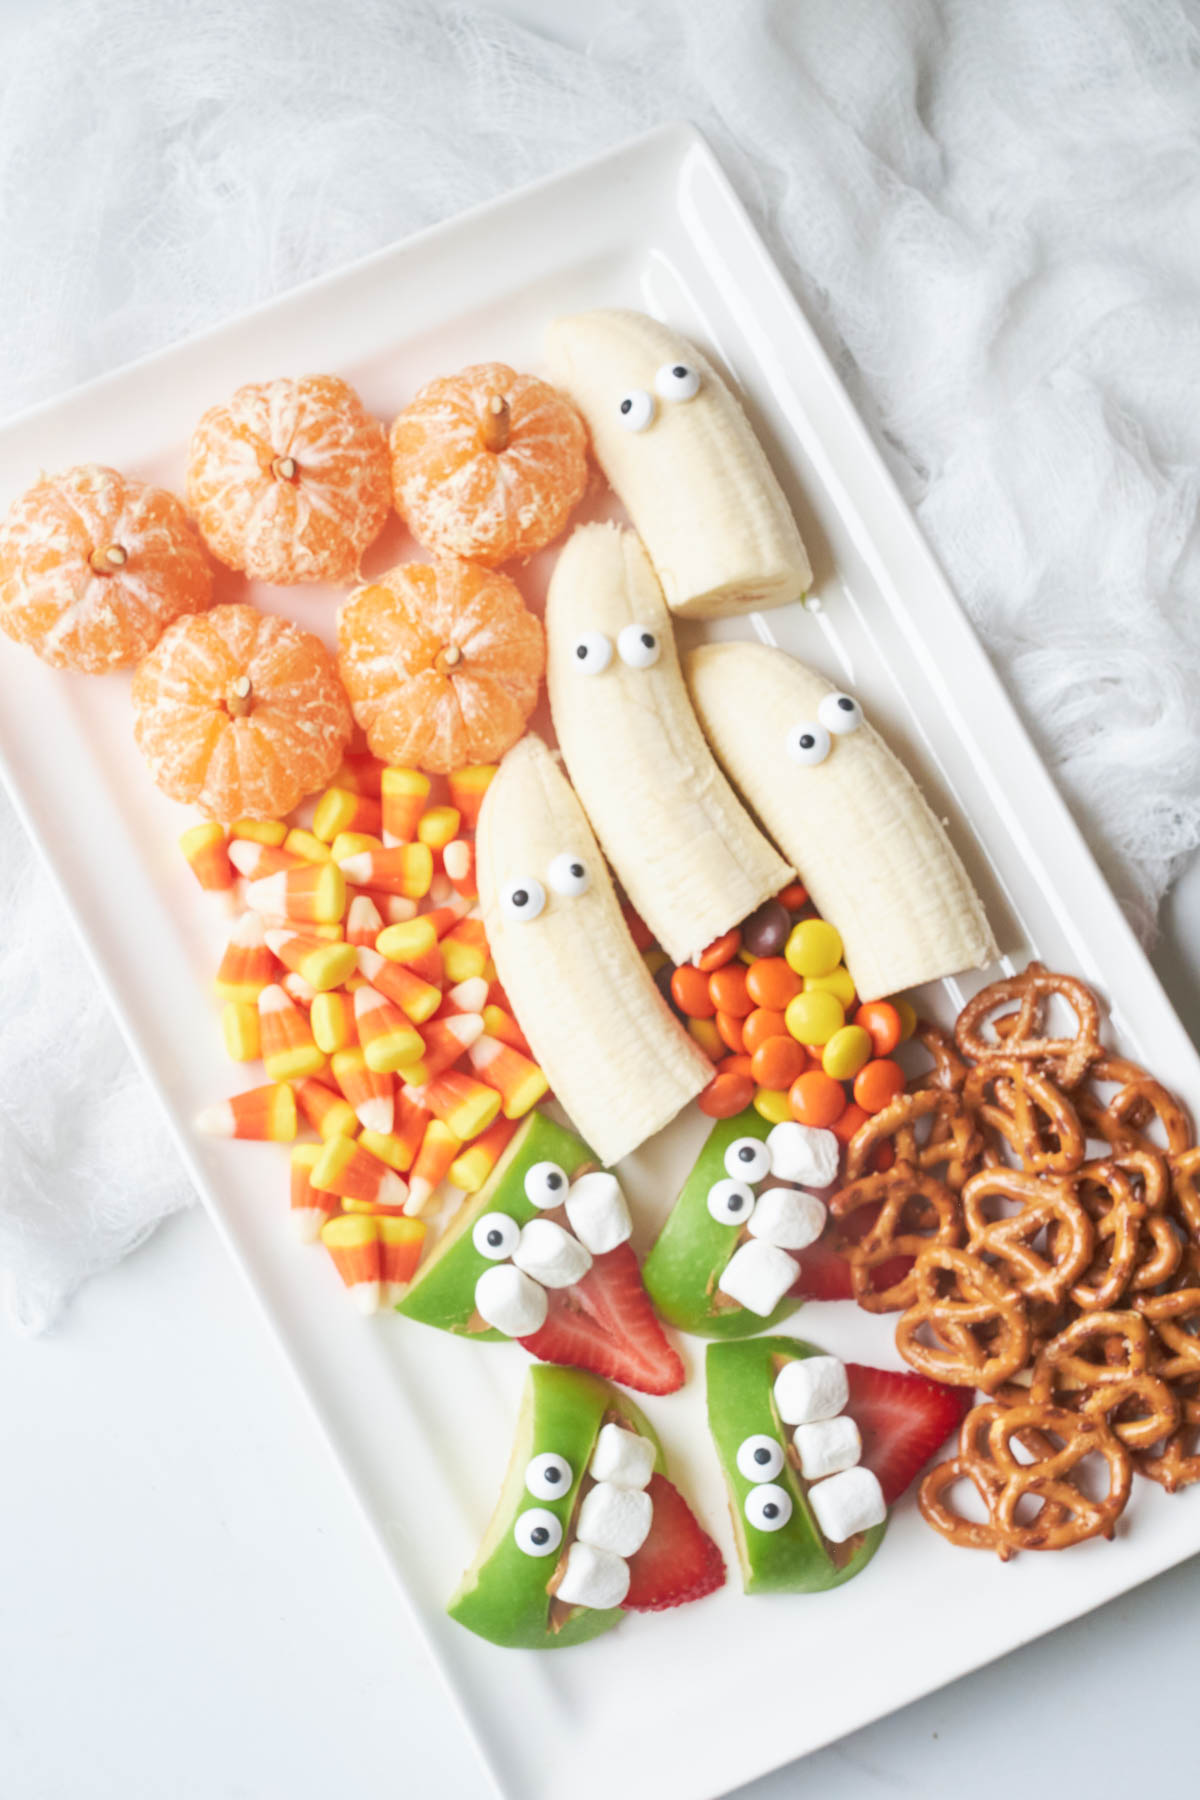 the completed halloween fruit tray ready to be served